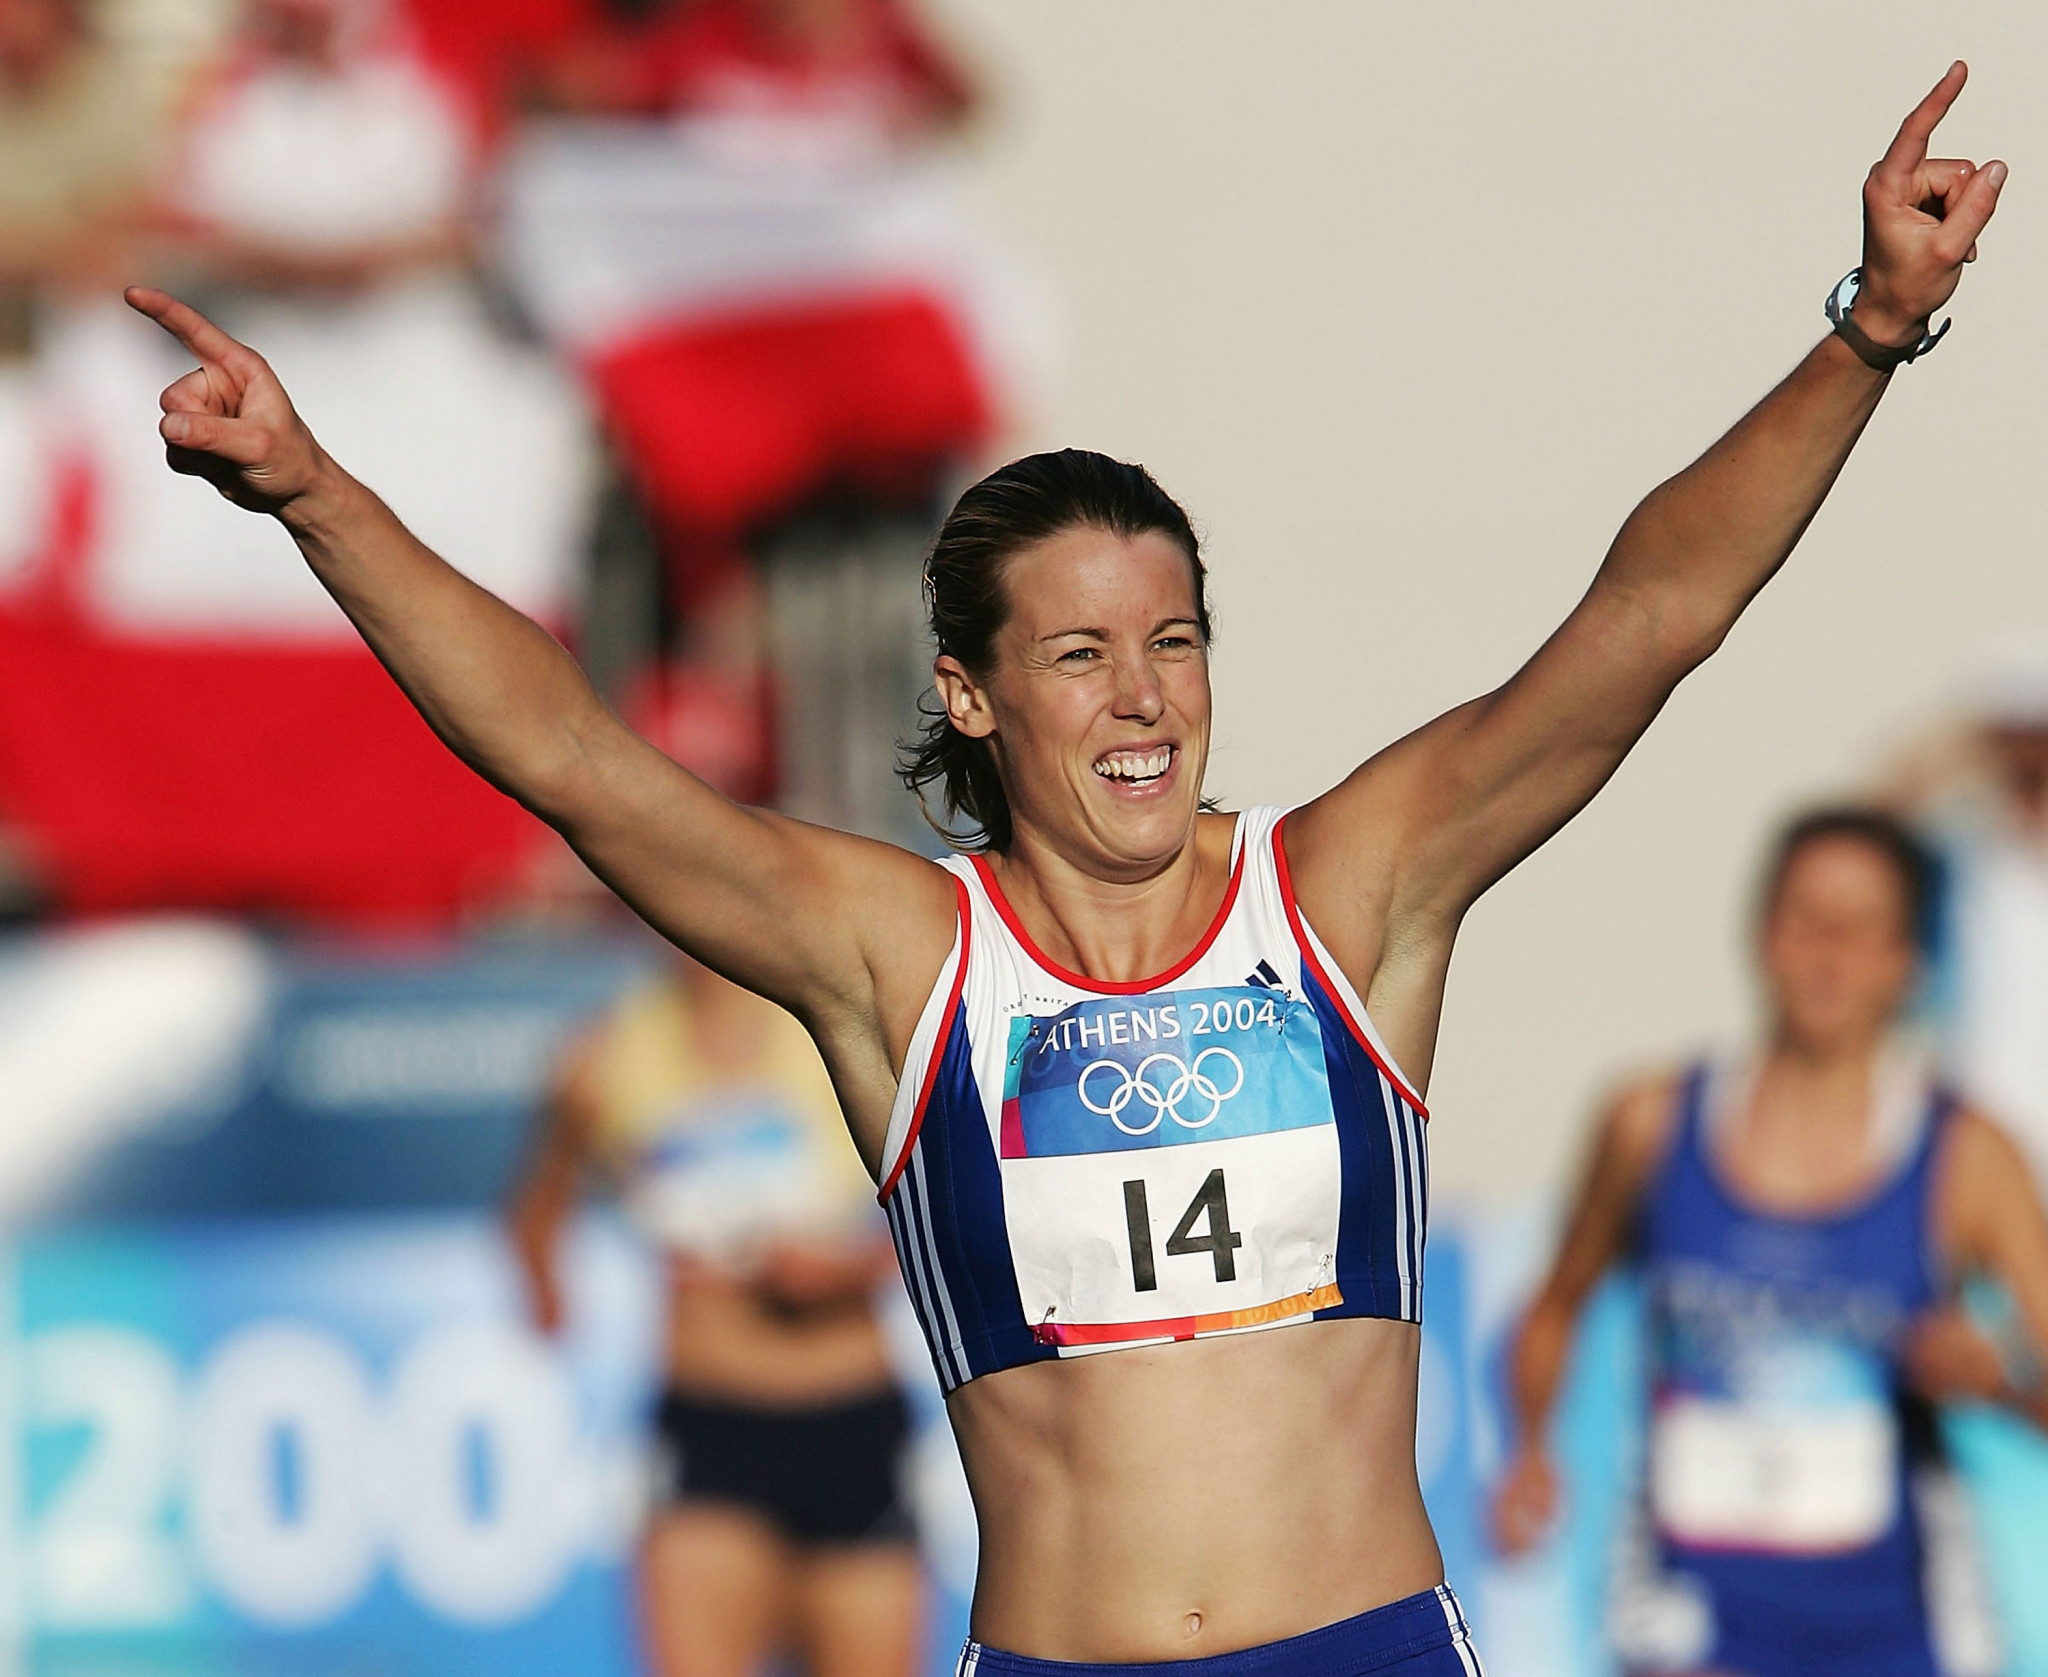 Georgina Harland has enjoyed Olympic success as an athlete, winning bronze in the women's modern pentathlon event at Athens 2004 ©Getty Images